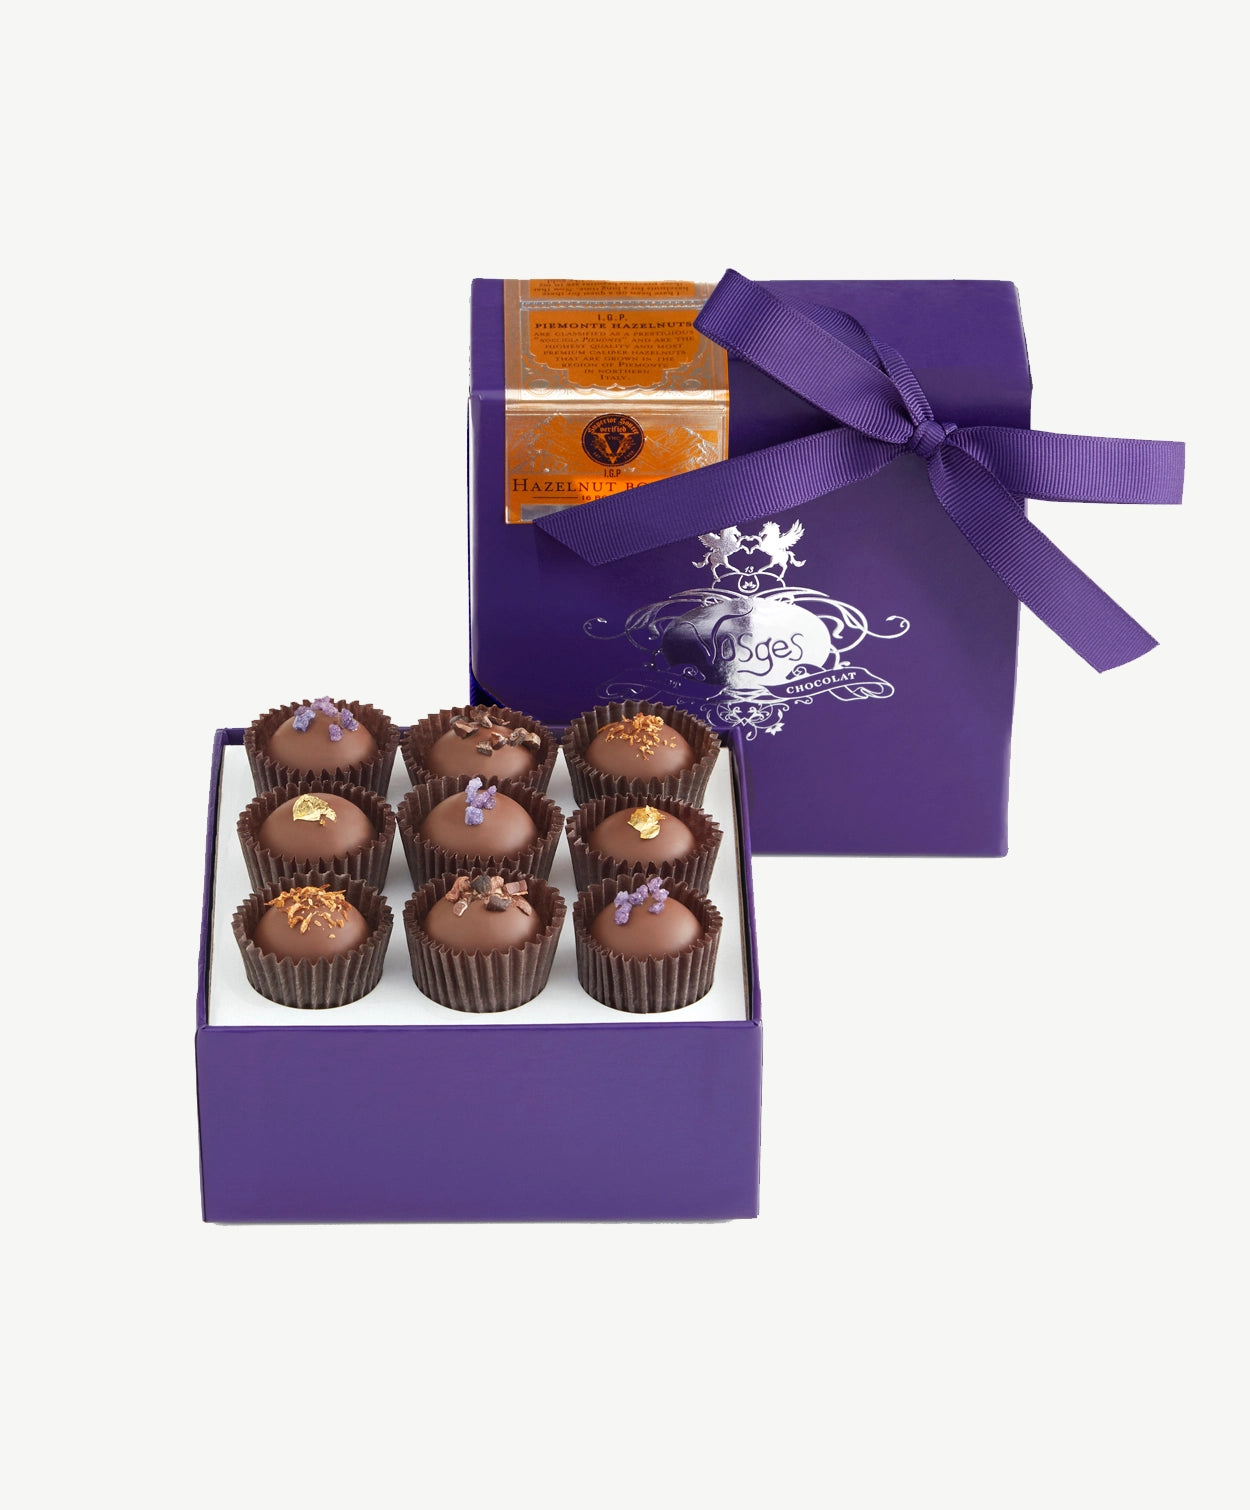 Open purple candy box tied embossed in silver tied with a purple ribbon bow sits upright displaying nine Vosges milk chocolate praline truffles topped with gold leaf, candied violet and coco nibs on a white background.